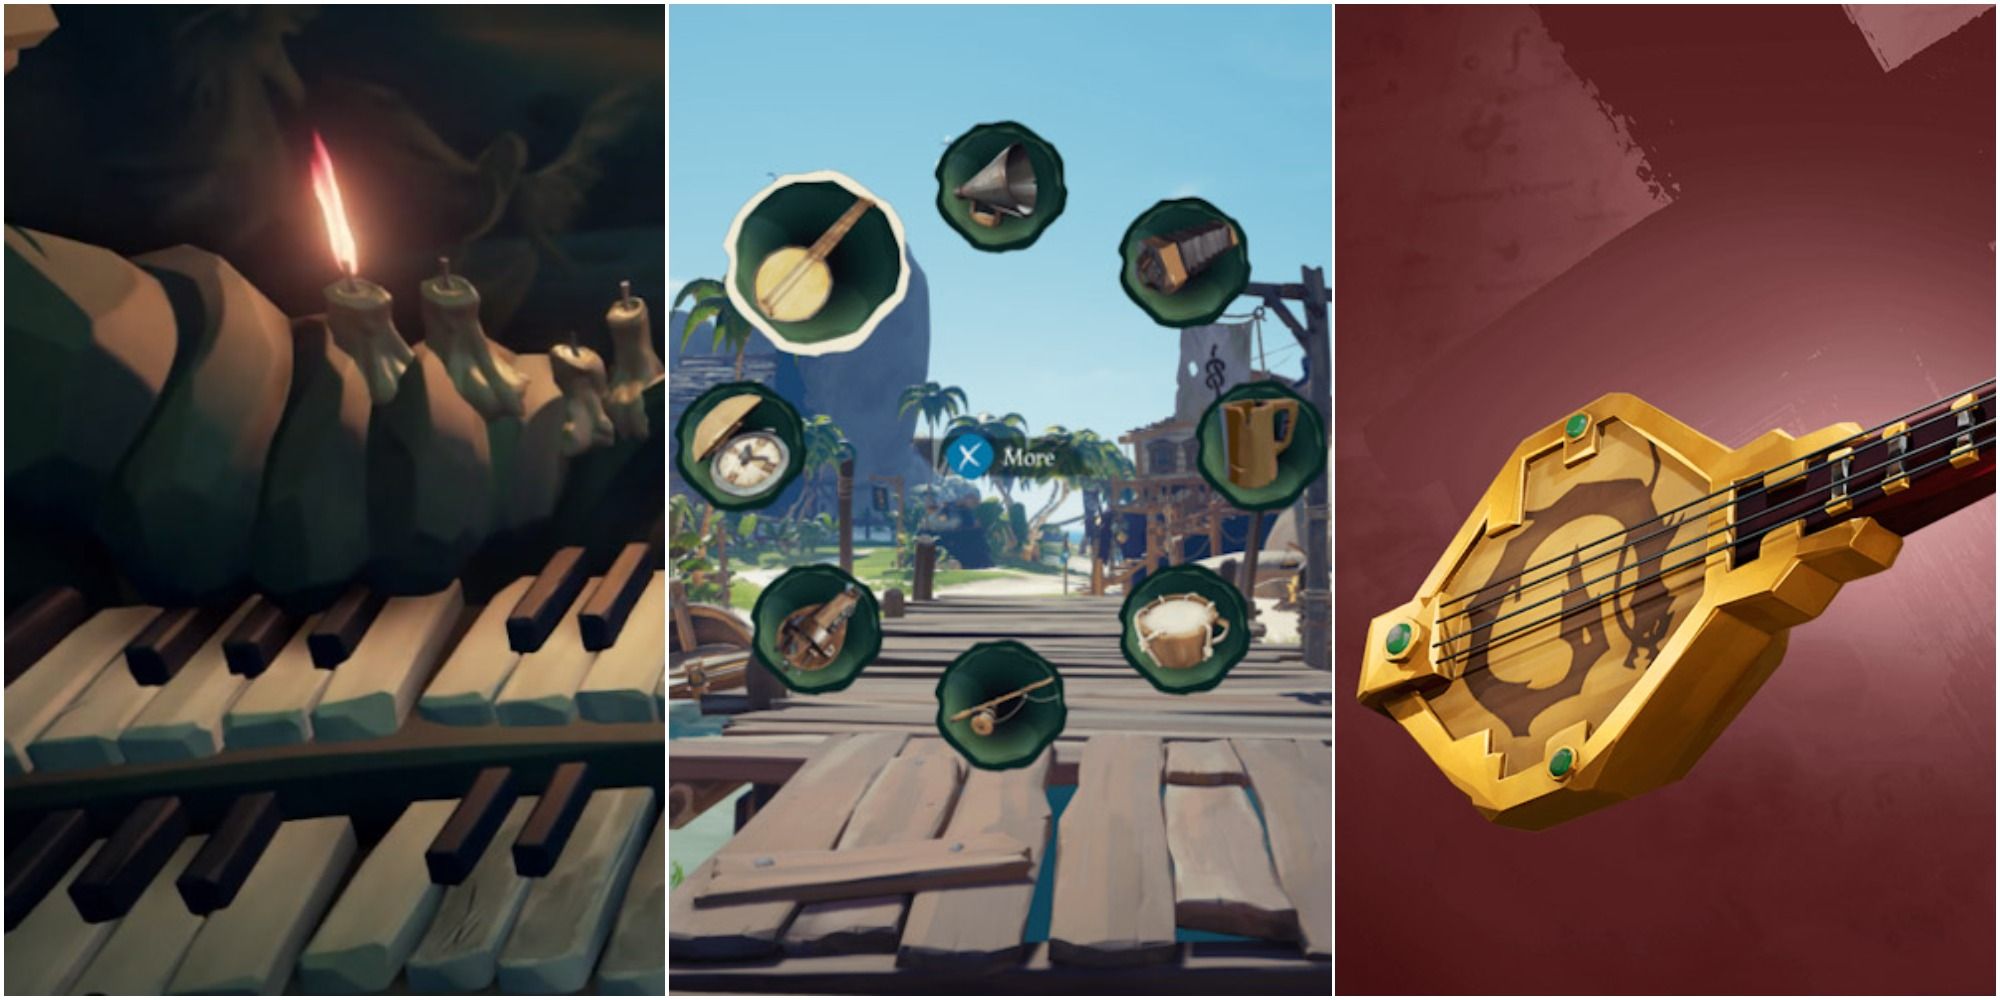 Sea Of Thieves Shanties Feature with instrument wheel, banjo, and organ